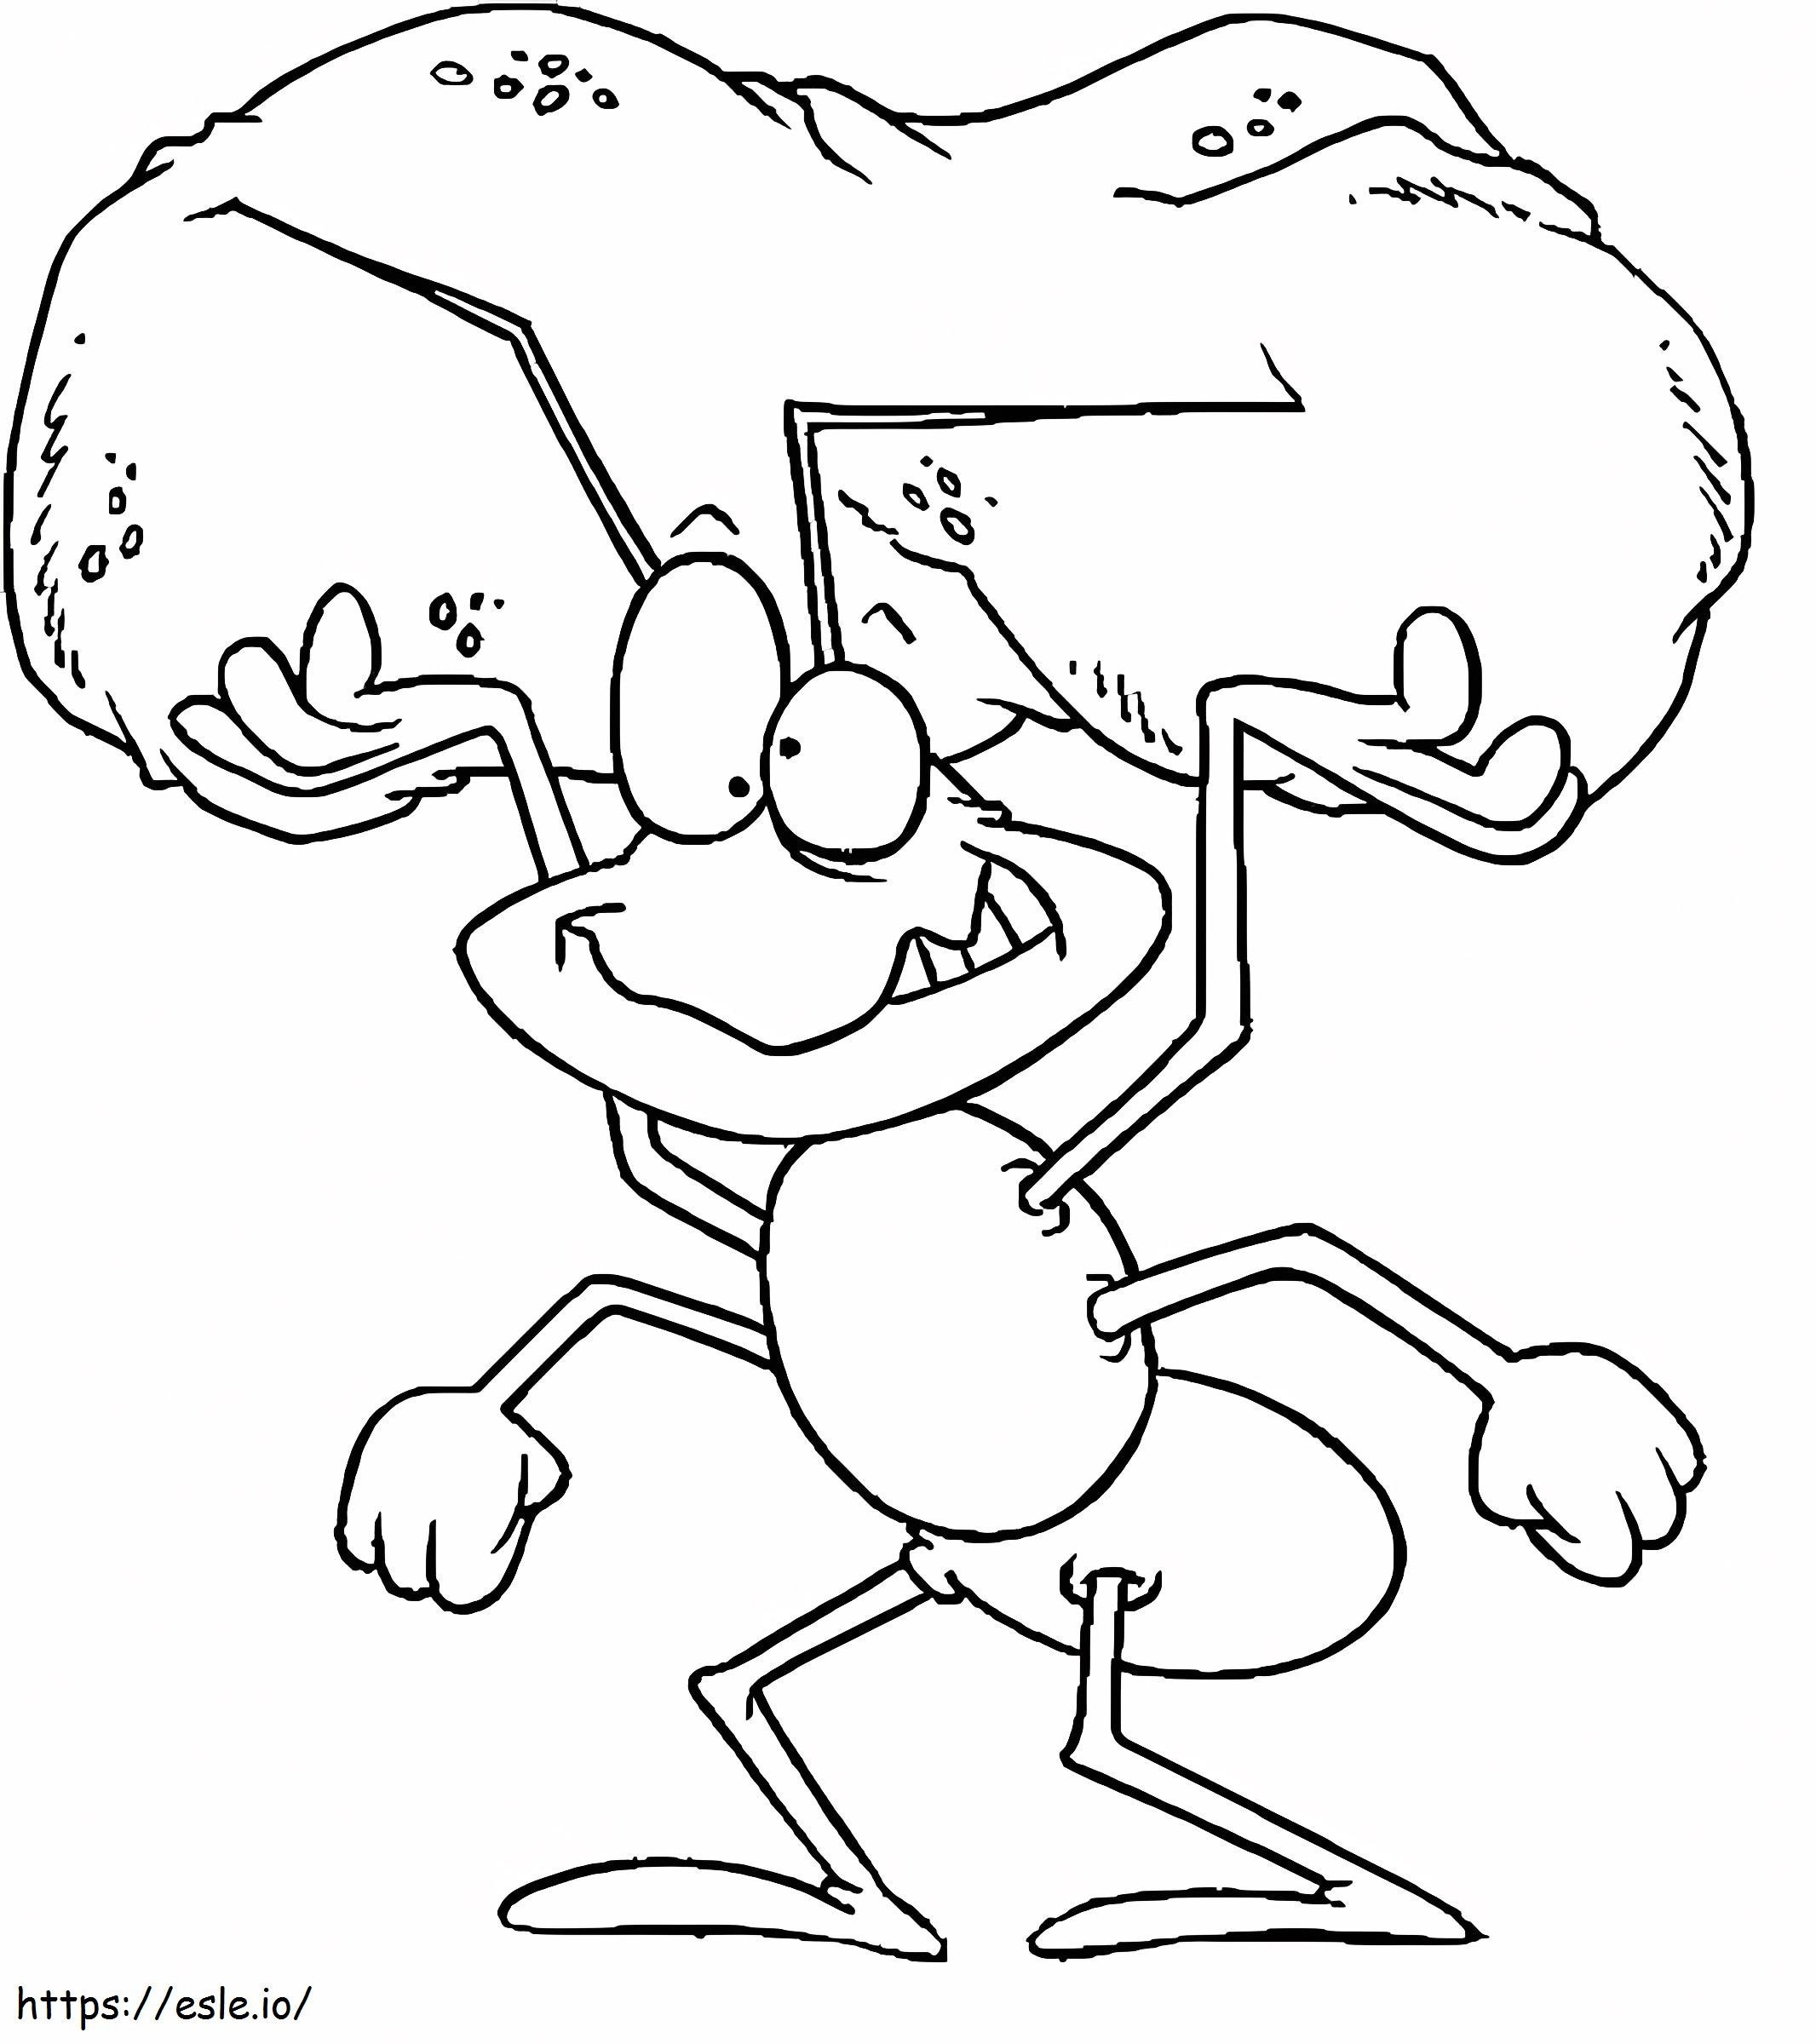 Ant Holding The Rock coloring page